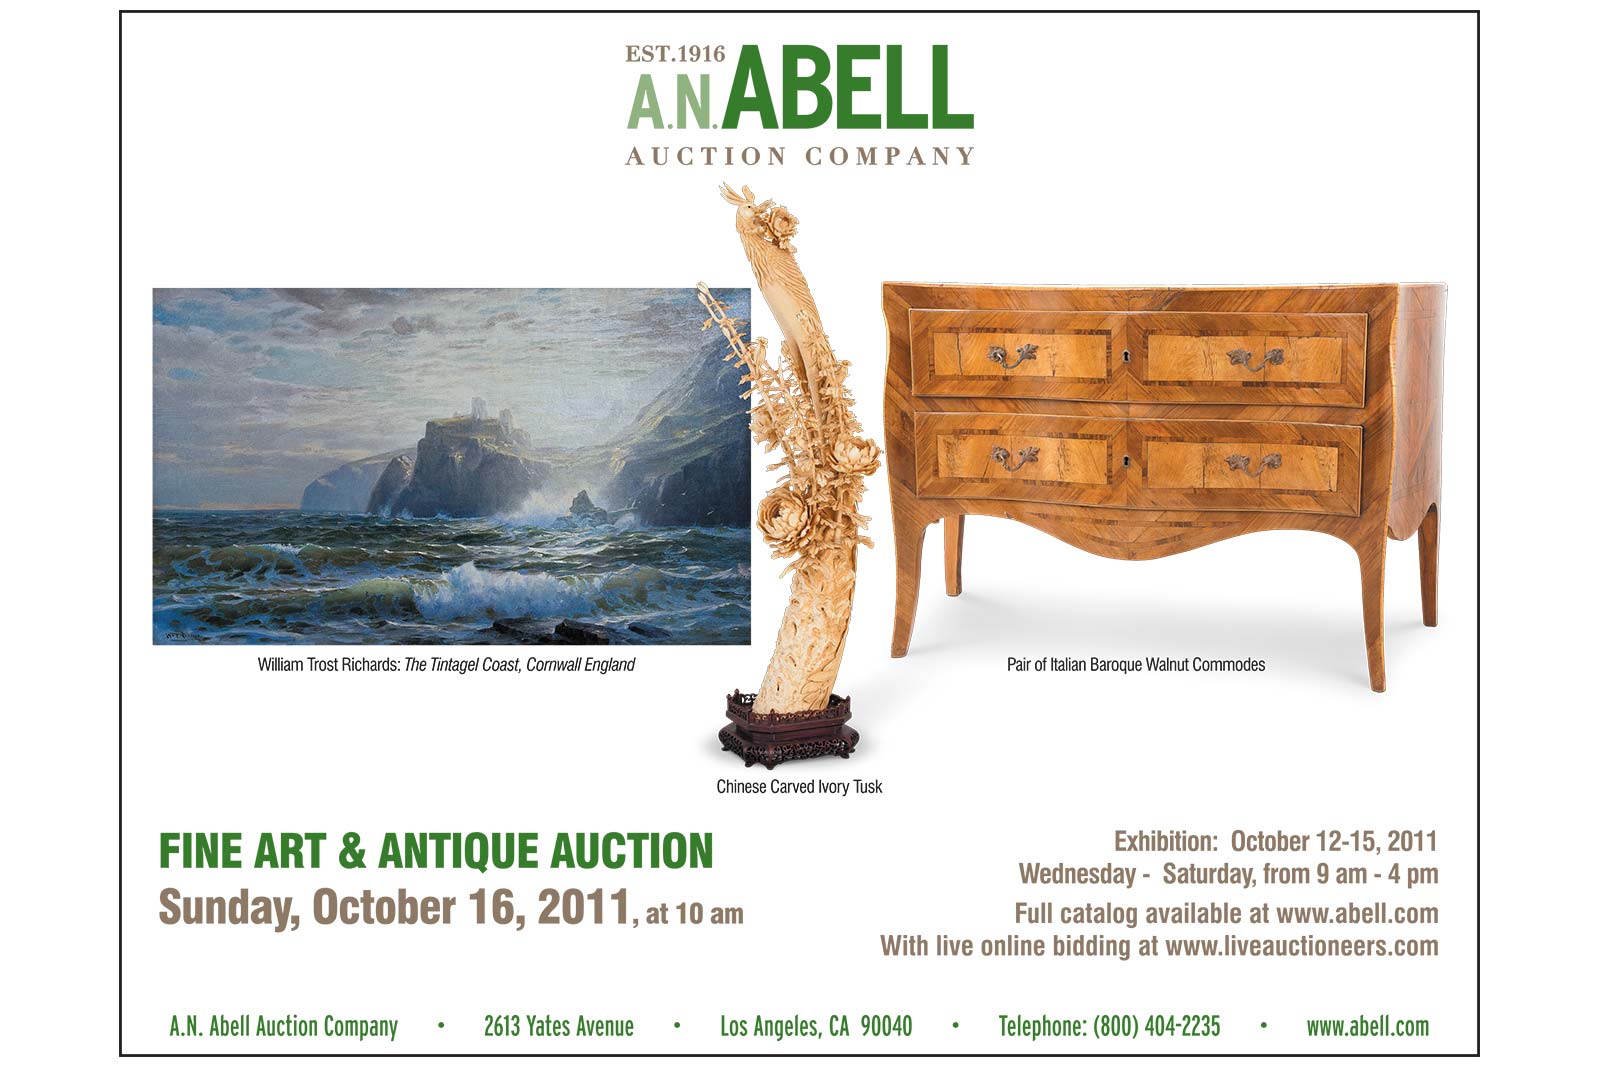 ABELL AUCTION COMPANY